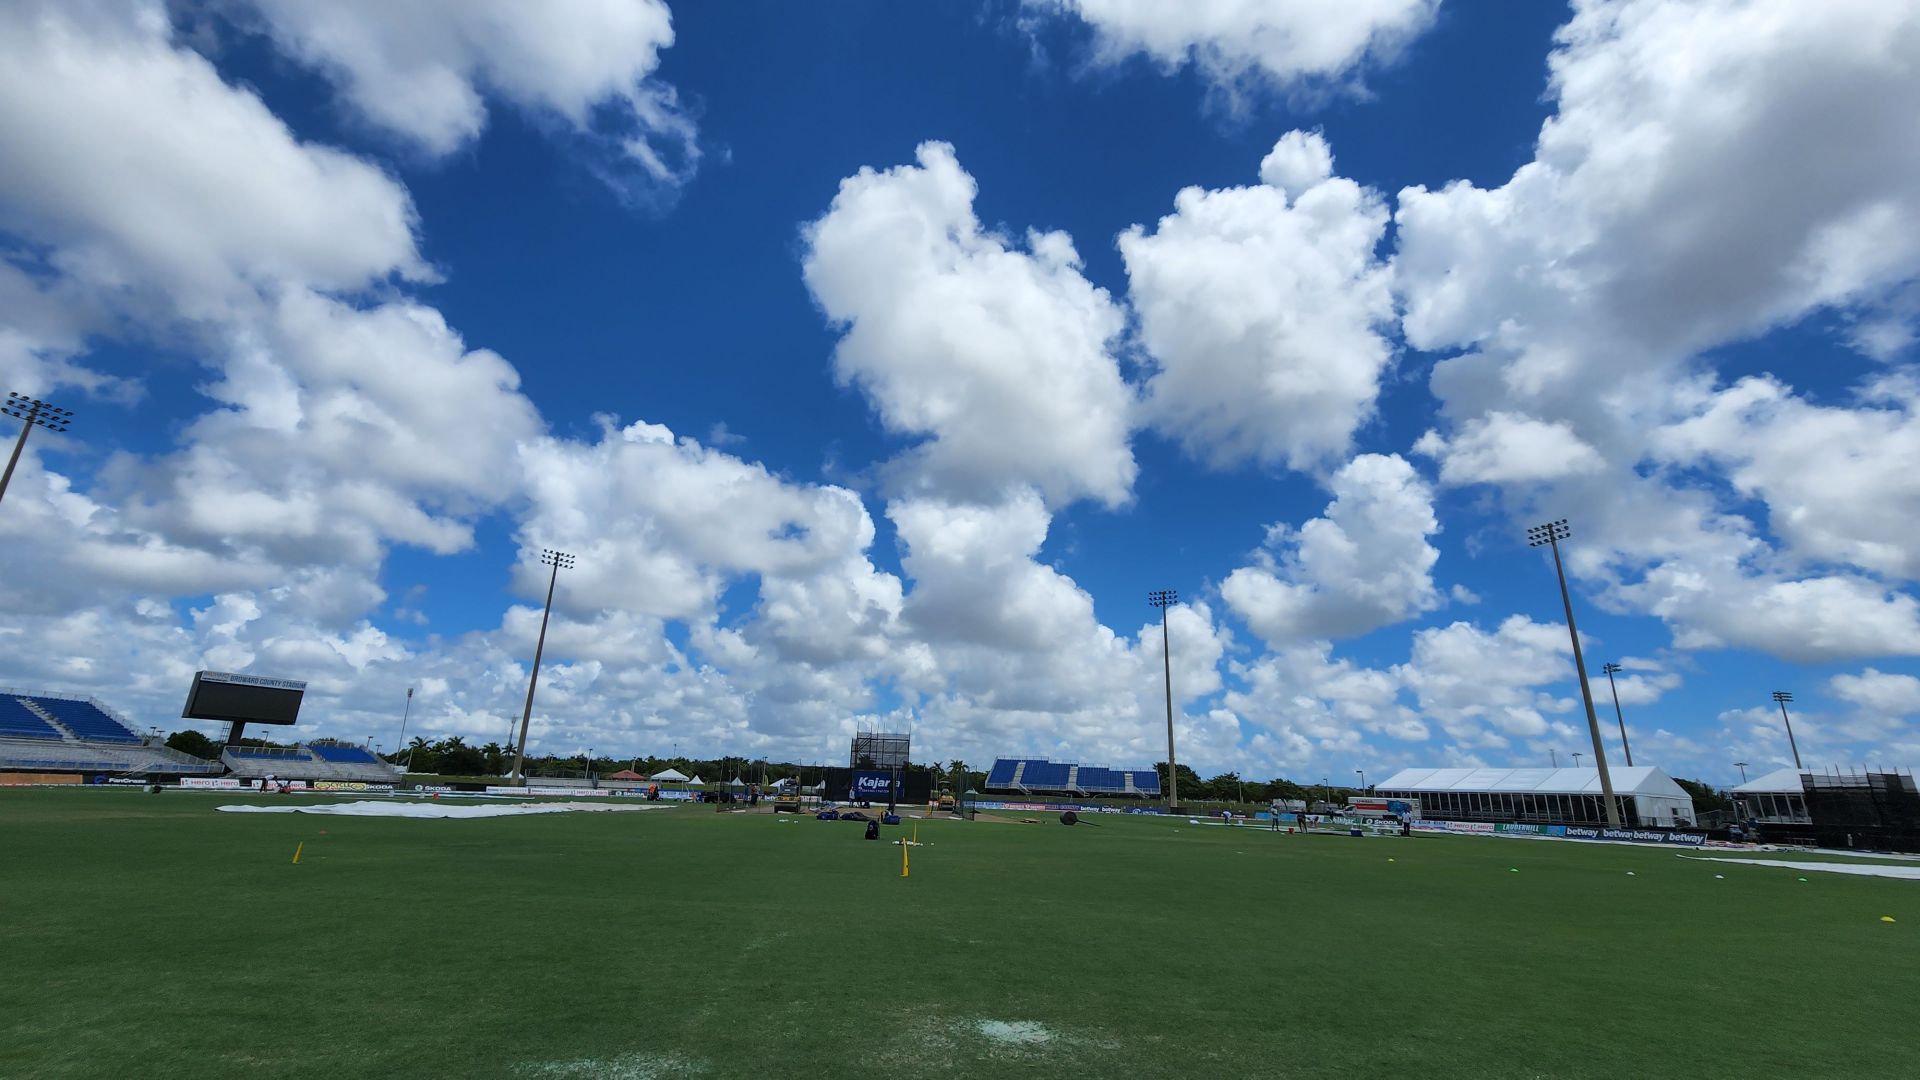 Lauderhill will host the last T20Is of the series between the Indian cricket team and the West Indies cricket team (Image: Twitter/BCCI)